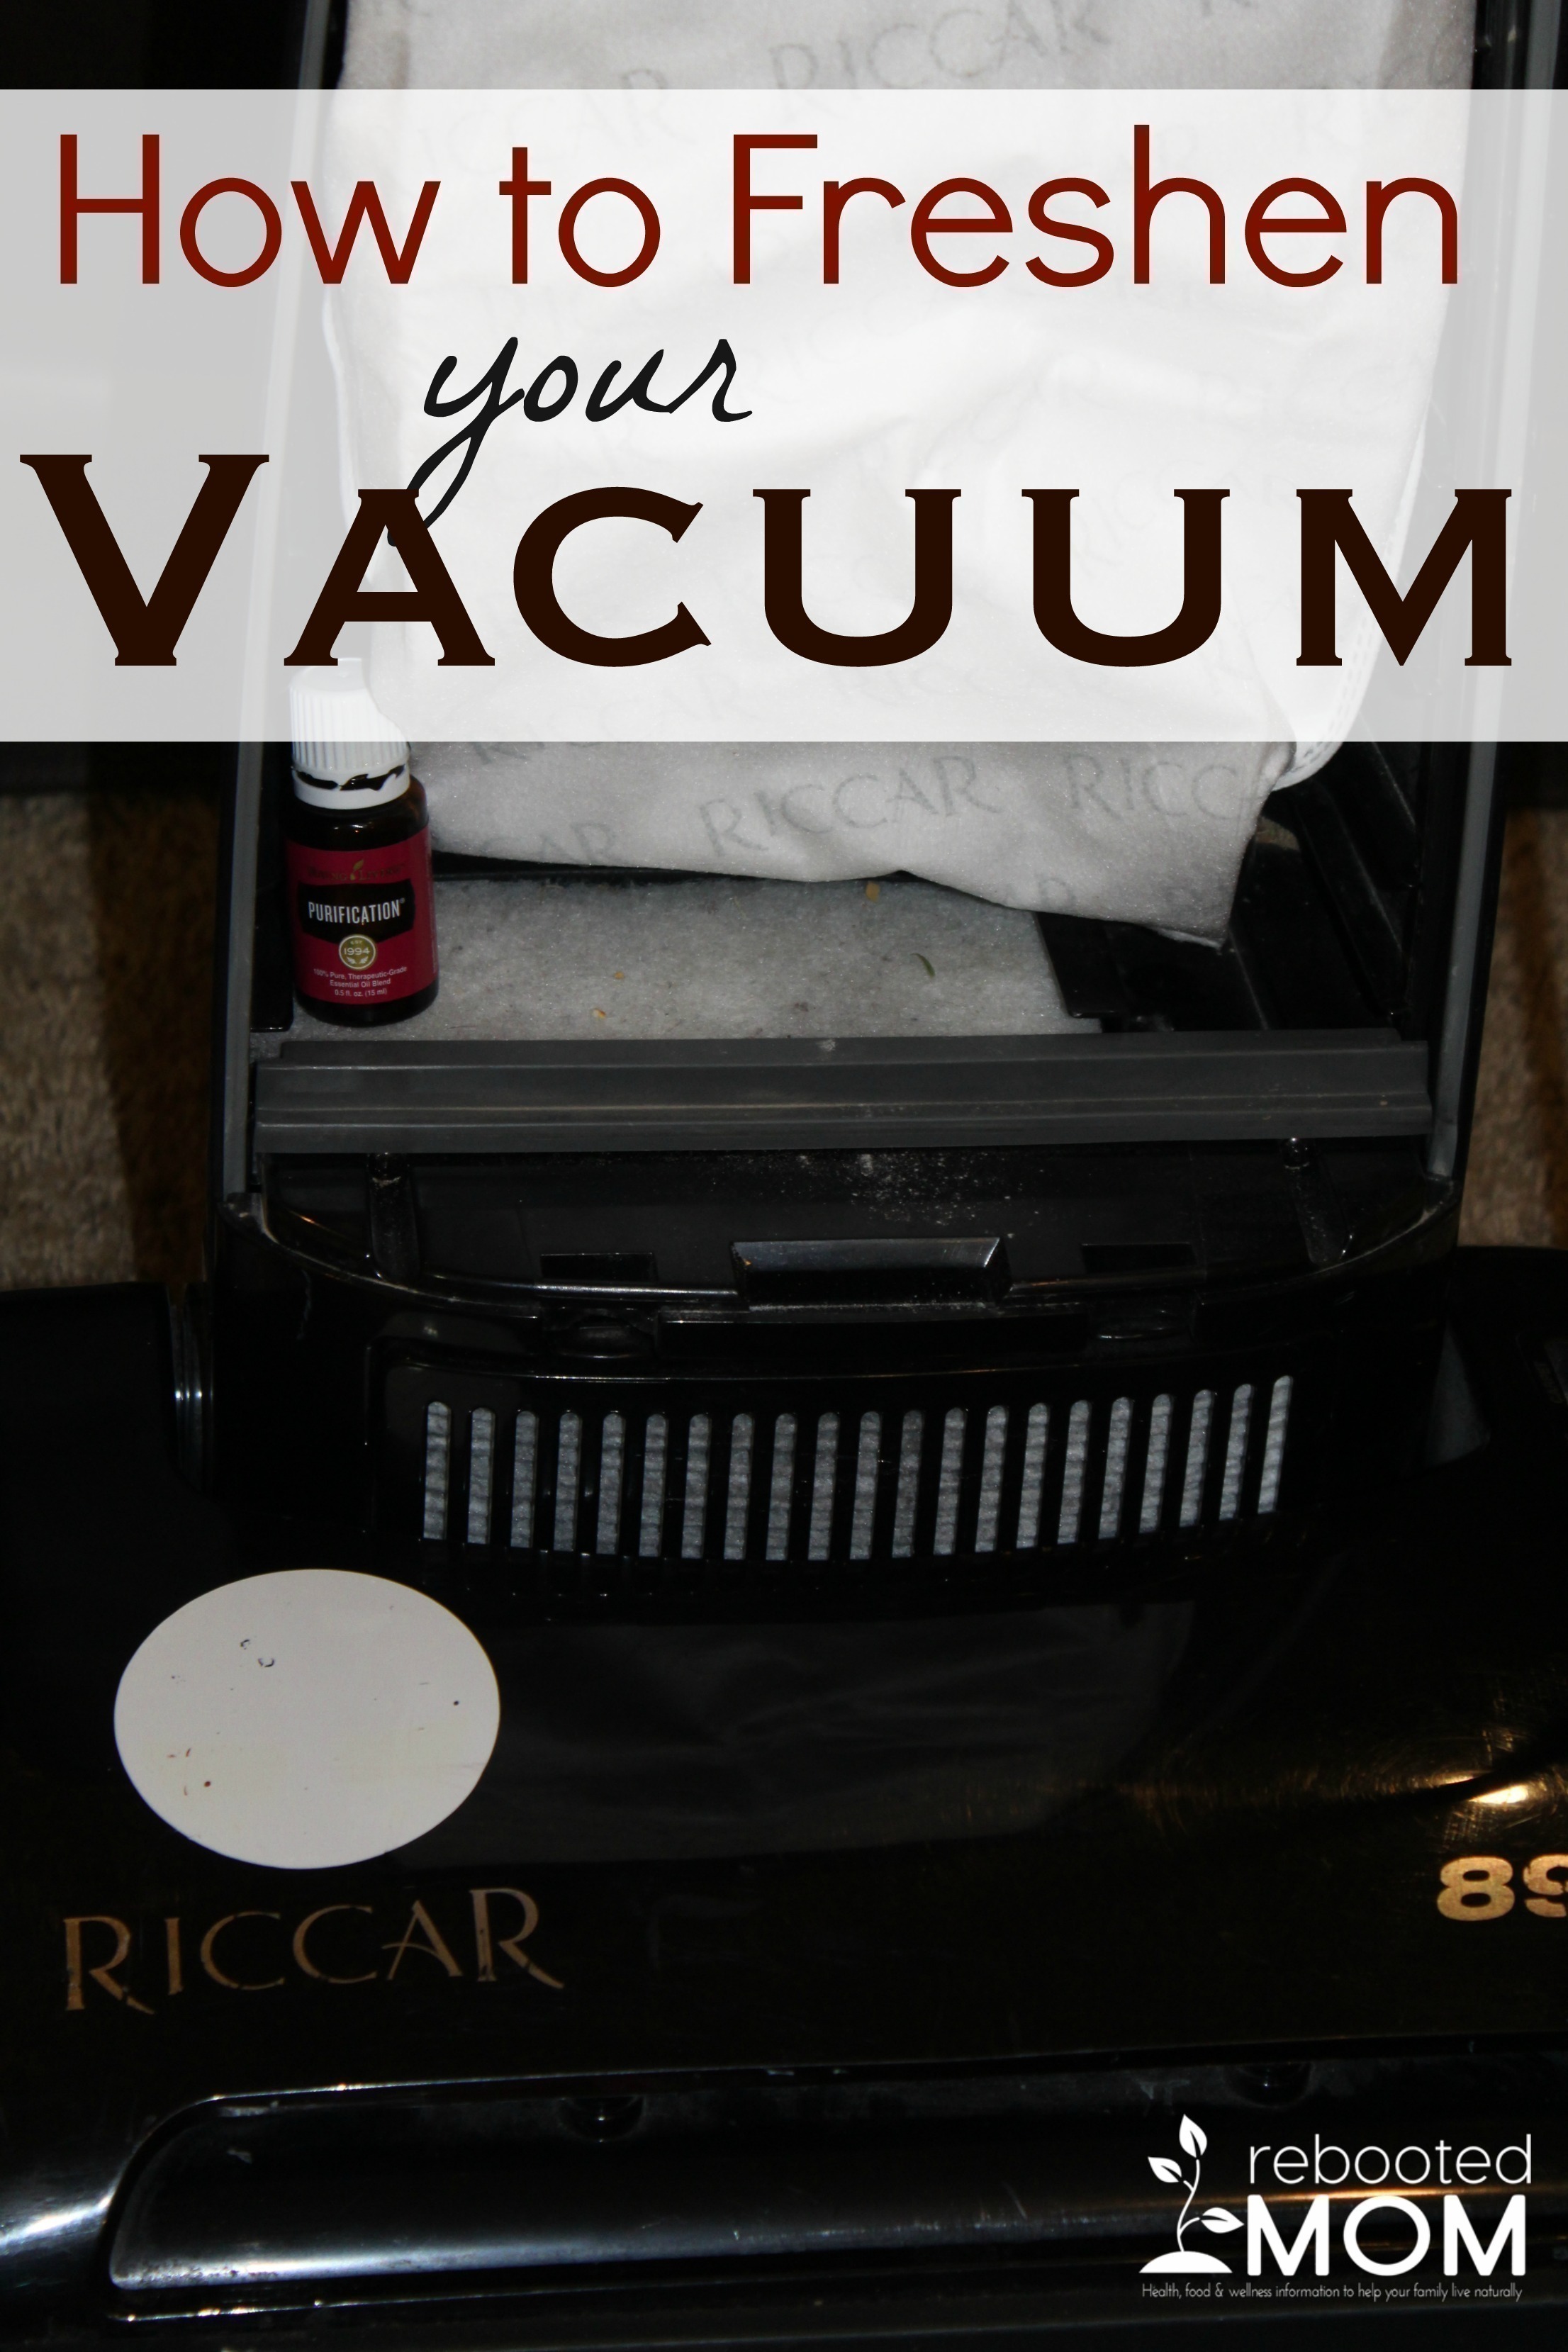 How to Freshen your Vacuum